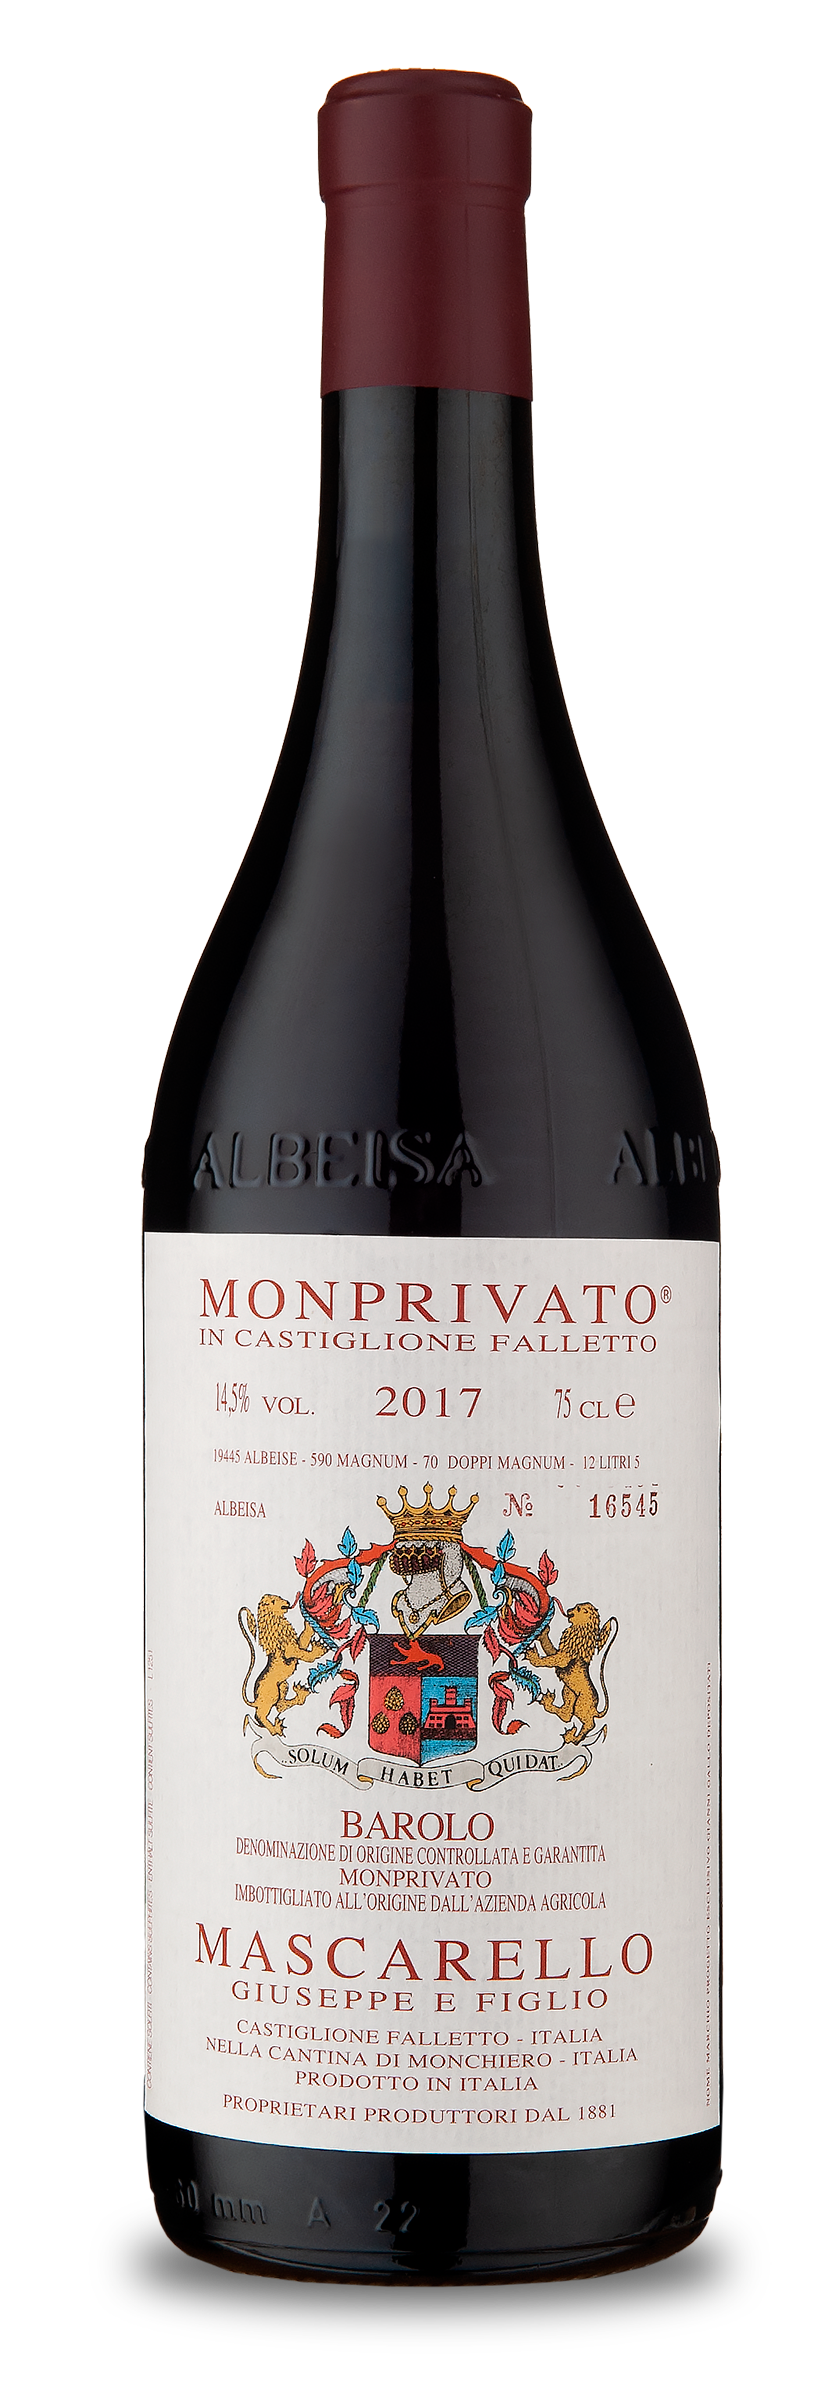 Barolo Monprivato 2017 1,5l - ONLY ON PRE-ALLOCATION Contact us for further information (indulge@flemmings.wine)